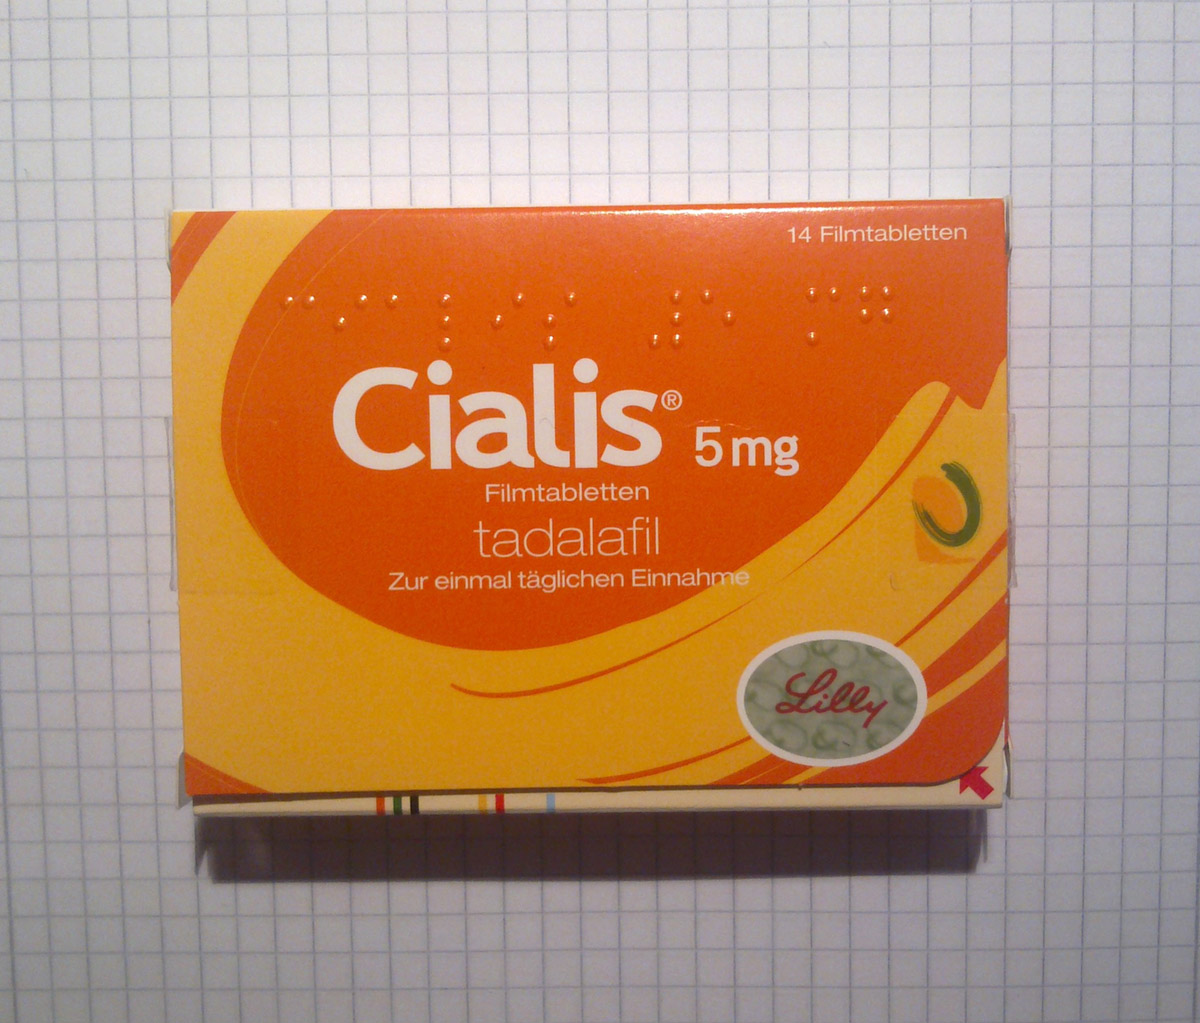 does cialis work better than tadalafil